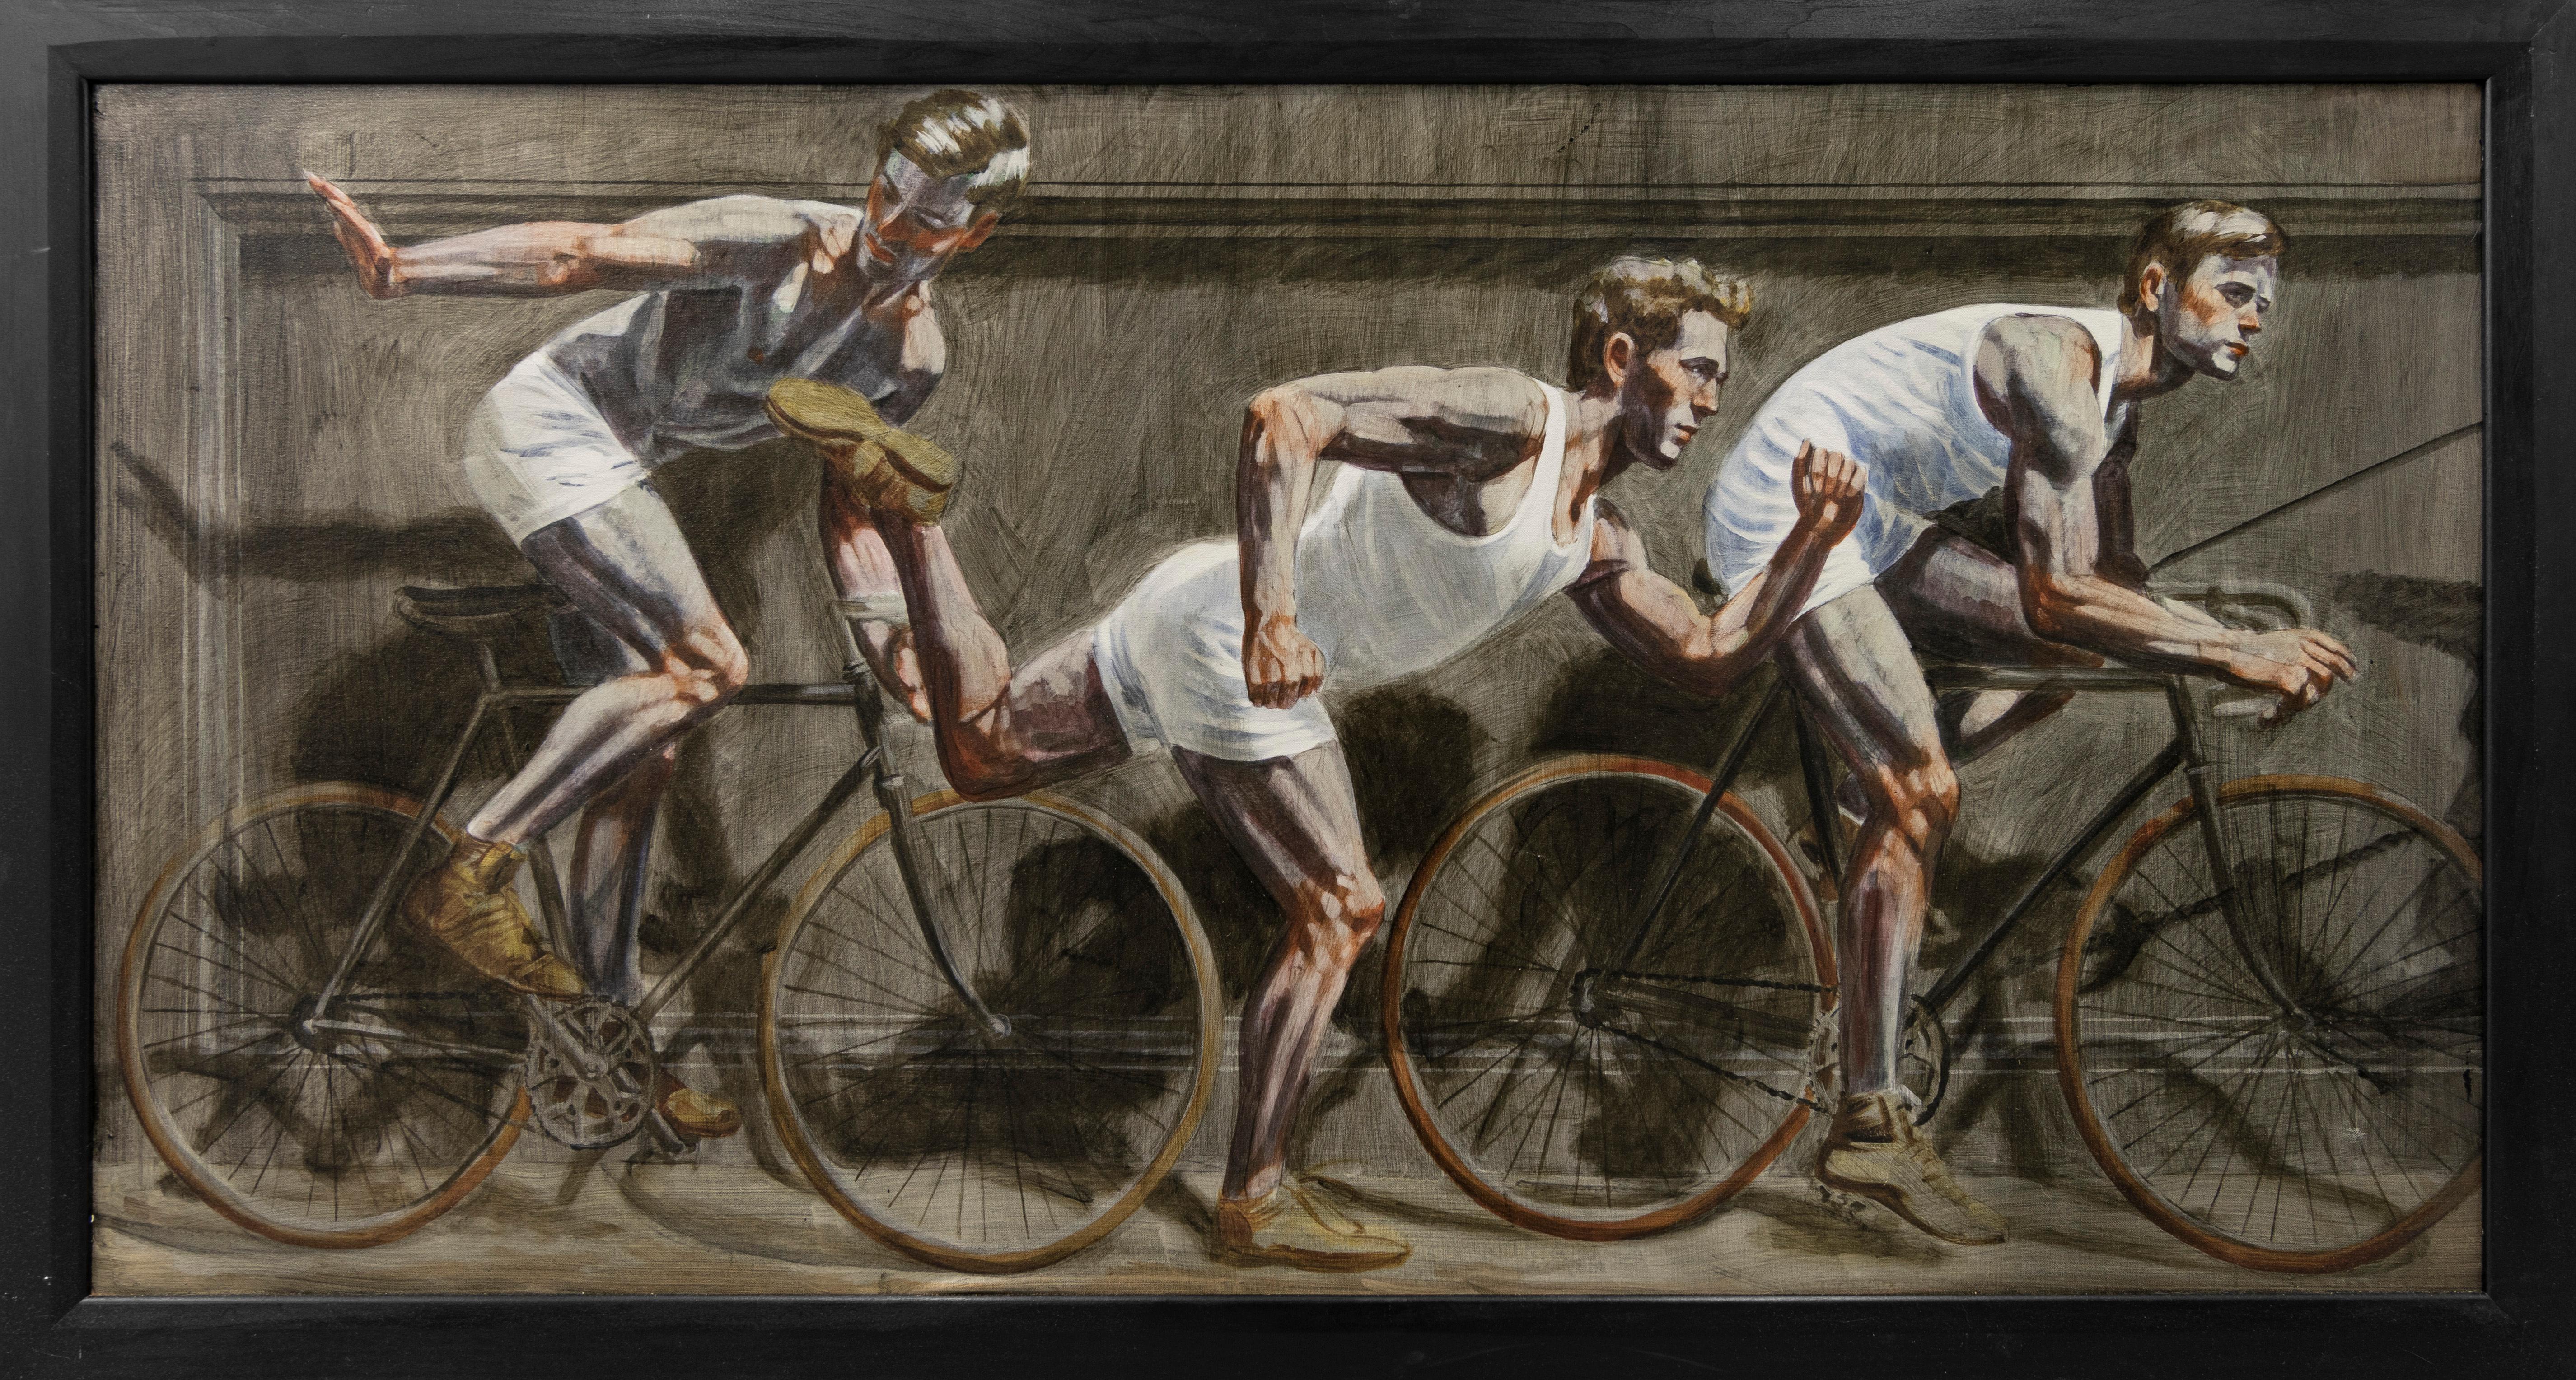 [Bruce Sargeant (1898-1938)] Frieze with One Runner Flanked by Two Bicyclists - Painting by Mark Beard